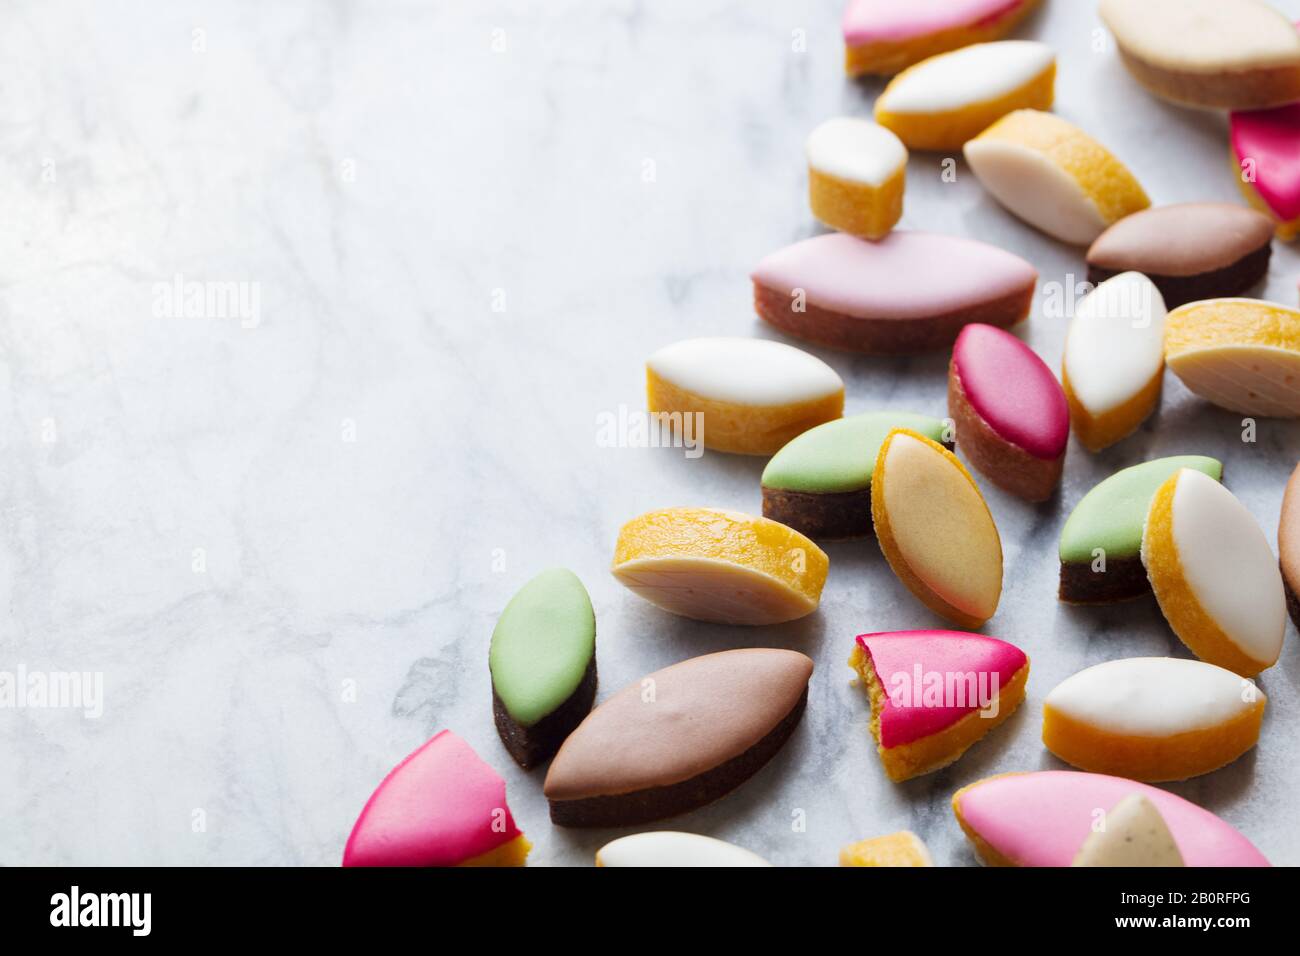 Typical almond sweets from france calissons d'aix Stock Photo - Alamy